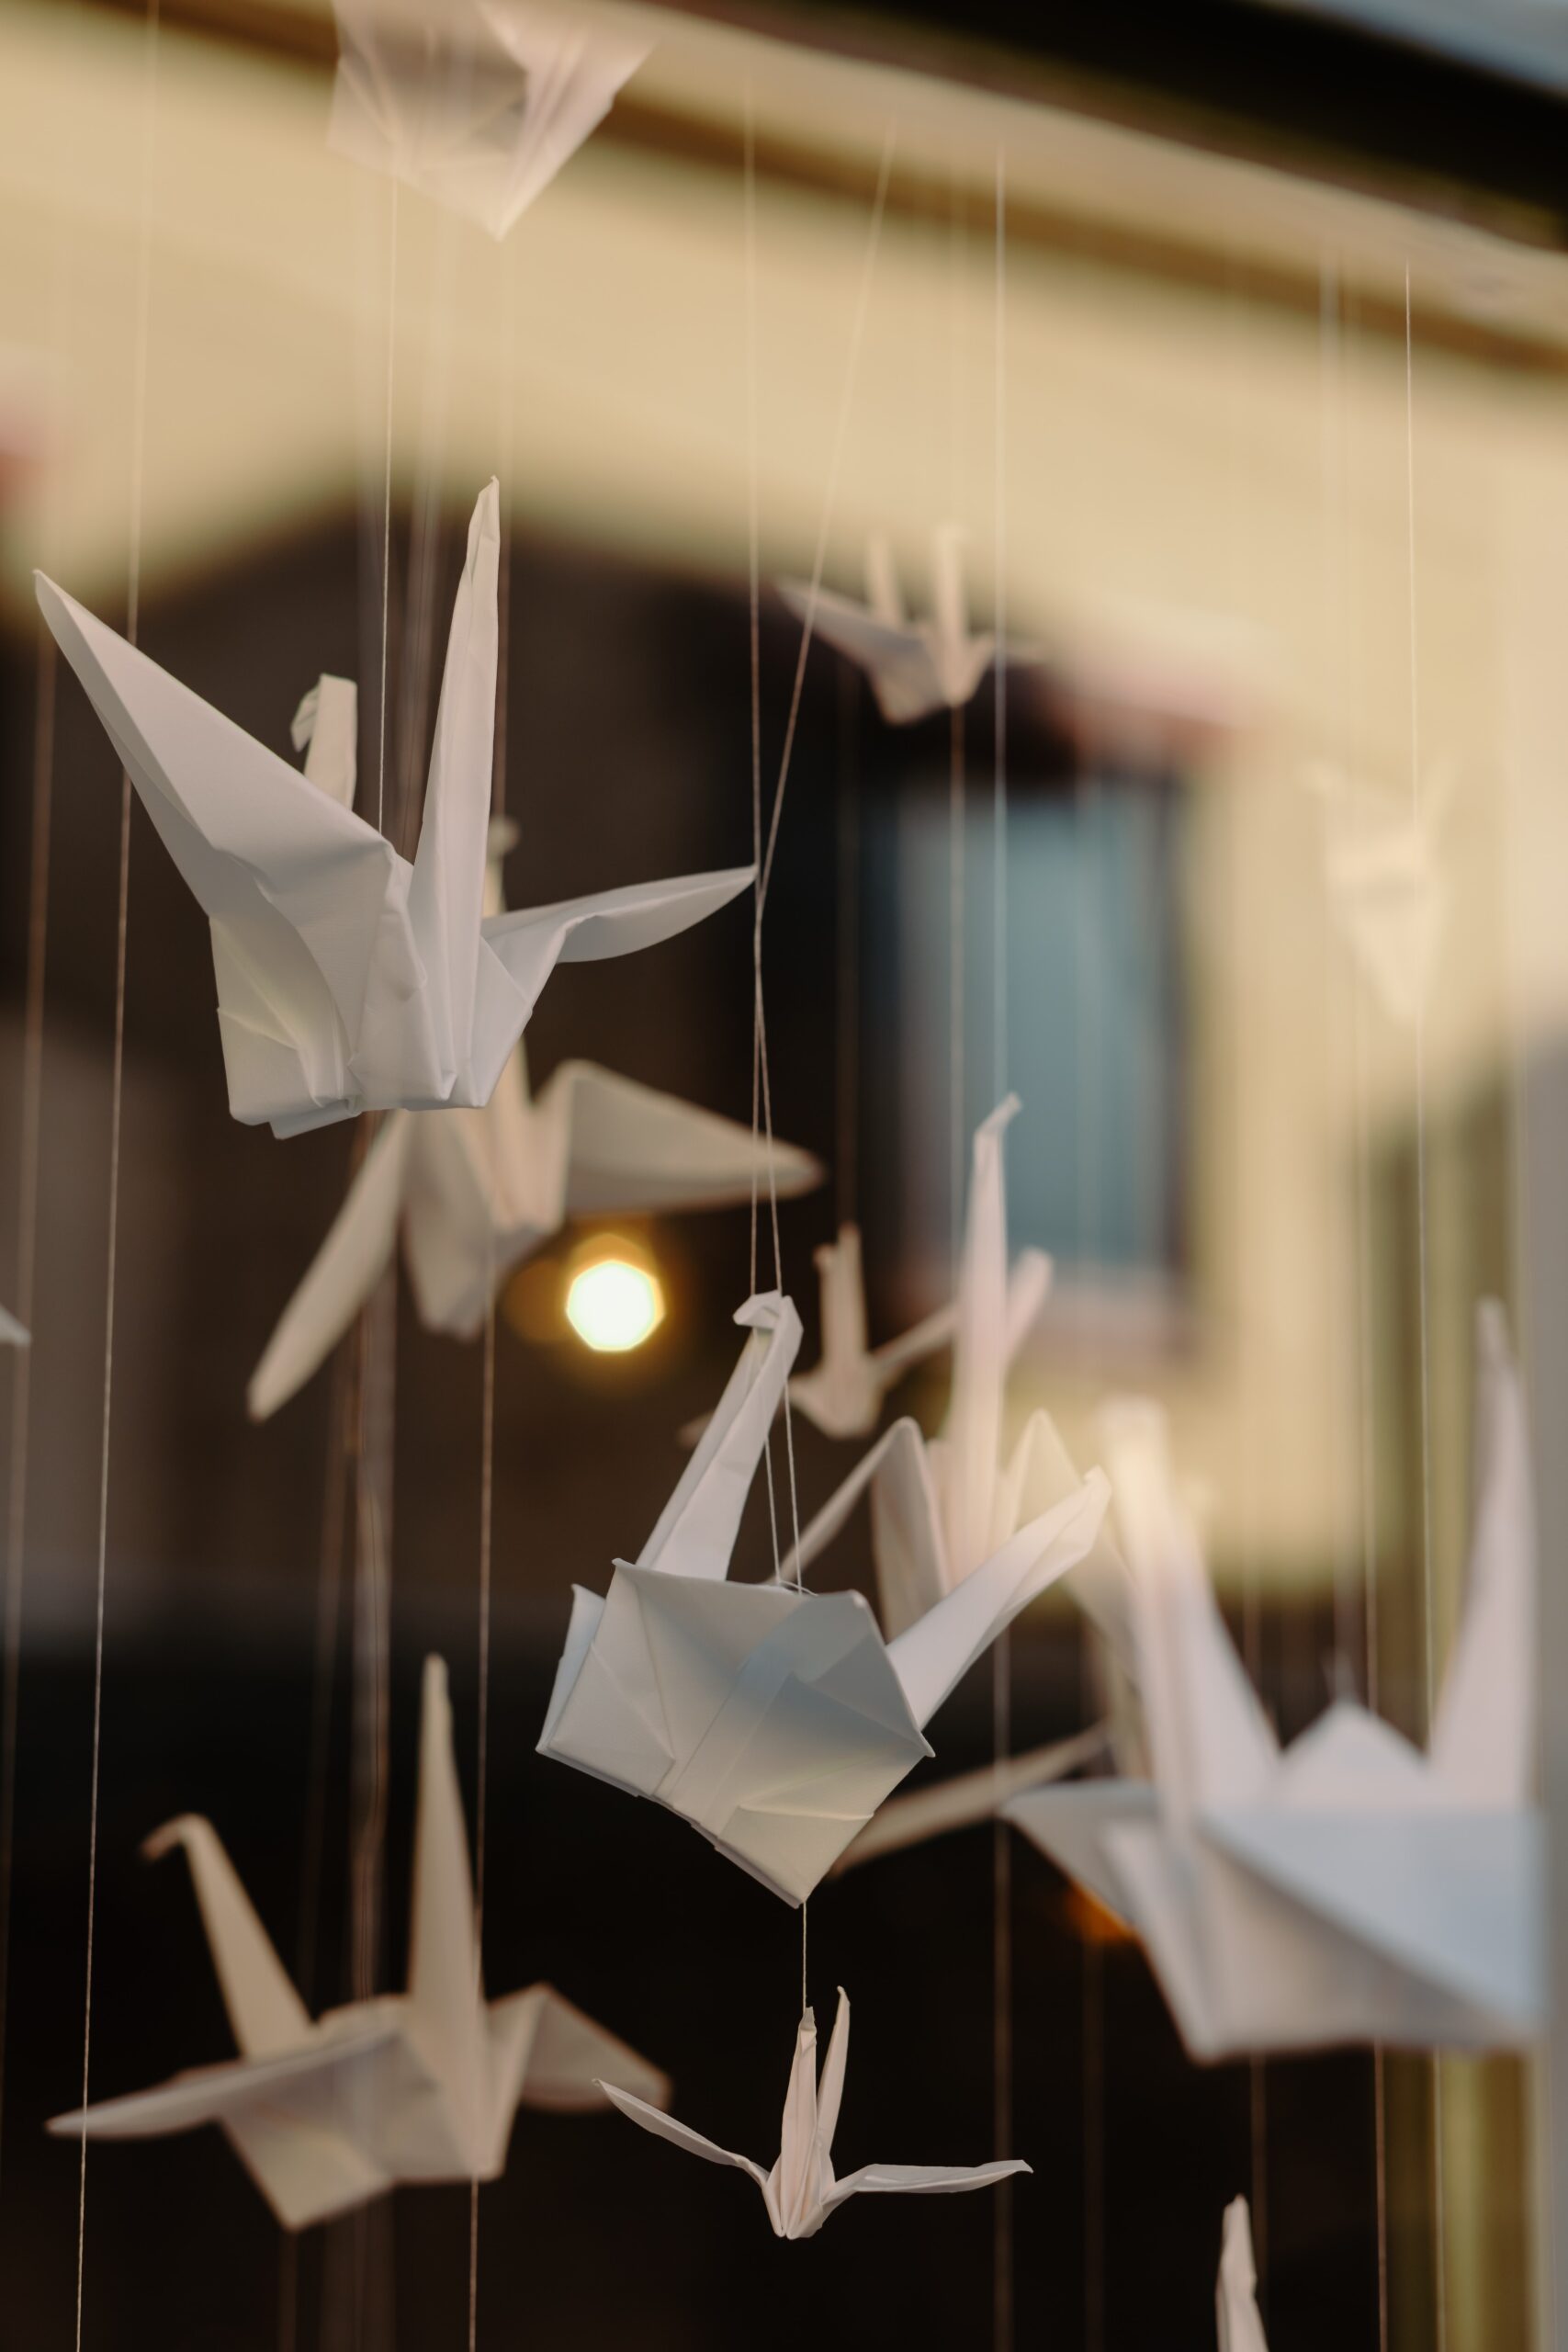 The Mind as an Origami Model: A Tale of Ambiguity and Emergence